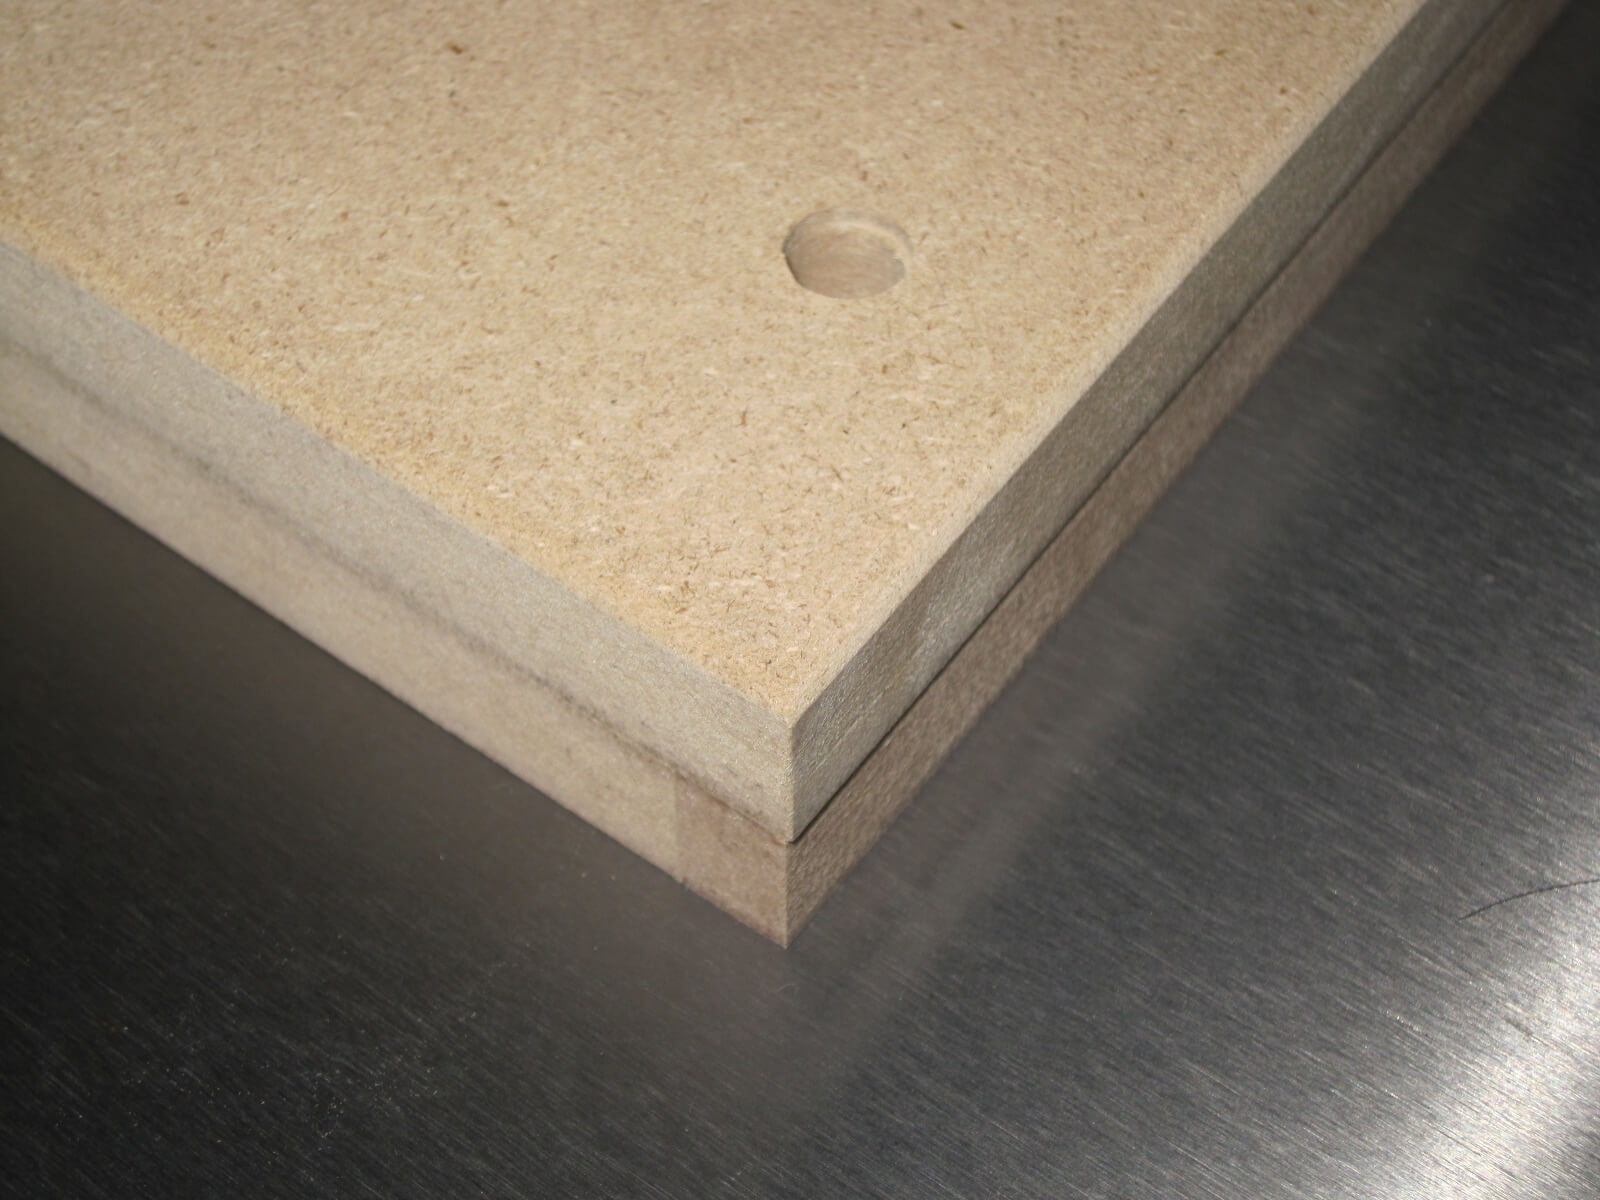 The two sheets of MDF glued together